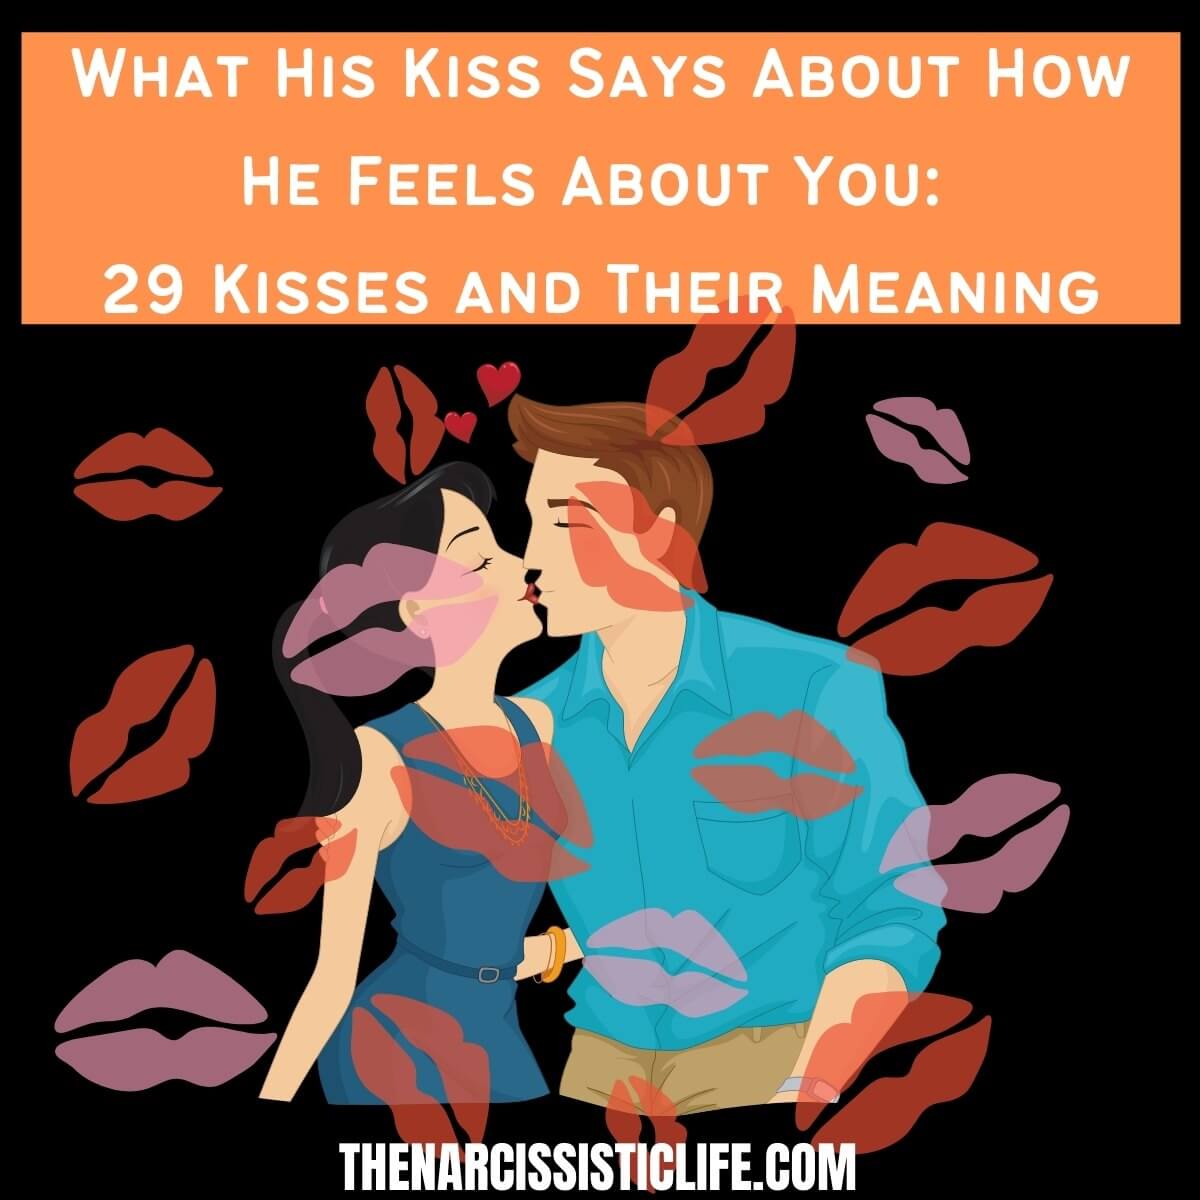 What His Kiss Says About How He Feels About You